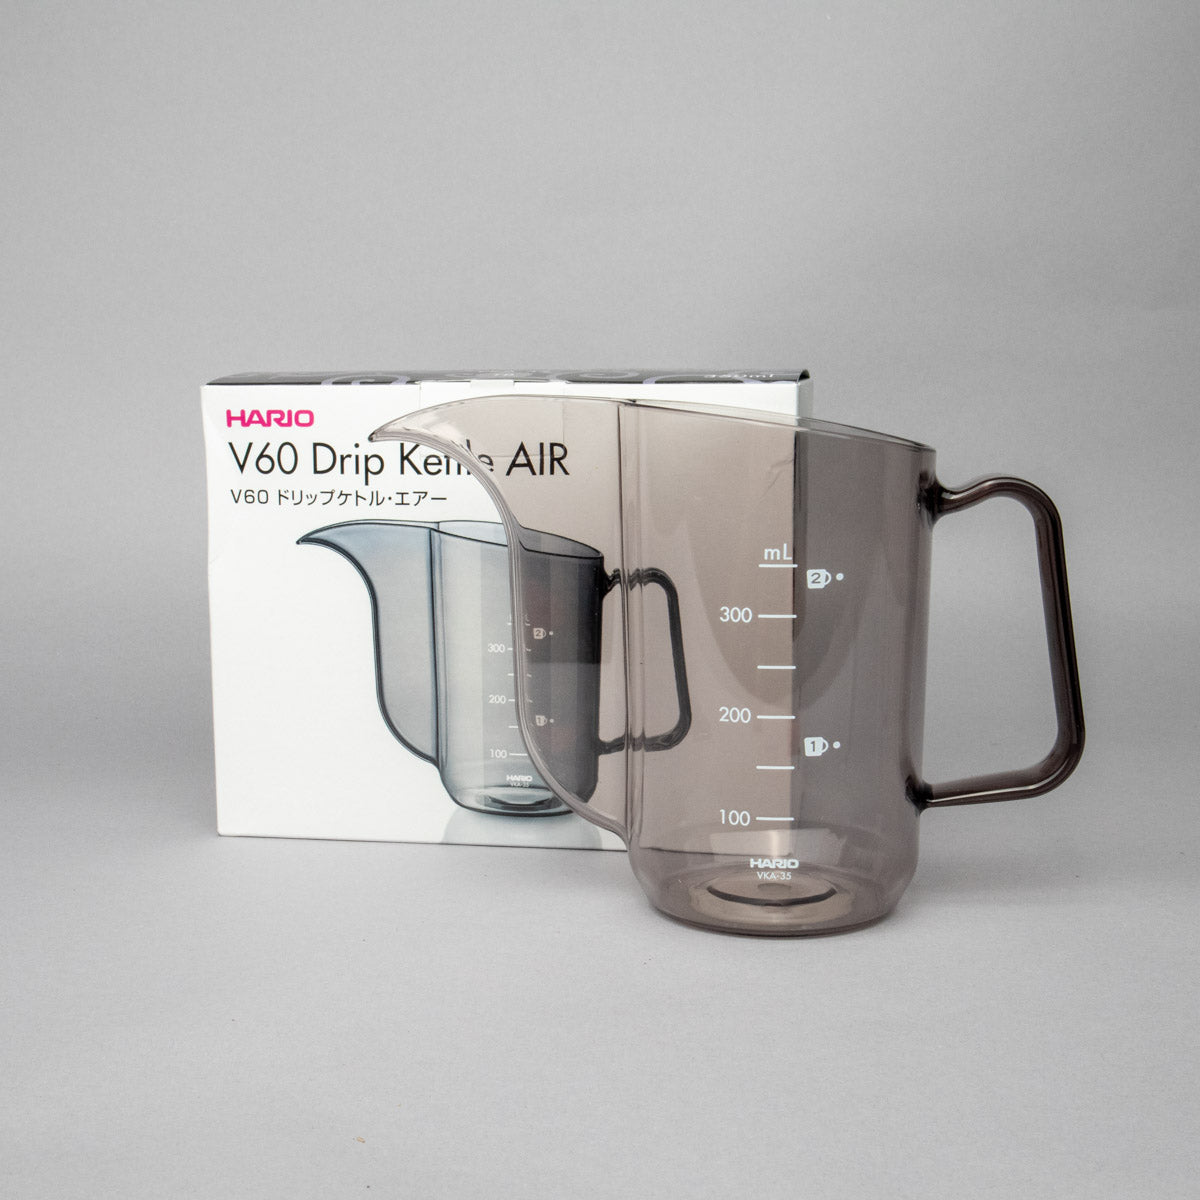 All in One Gift Set: Hario V60 Size 02 All-in-One Filter Coffee Maker and a 250g Bag of Specialty Coffee Beans